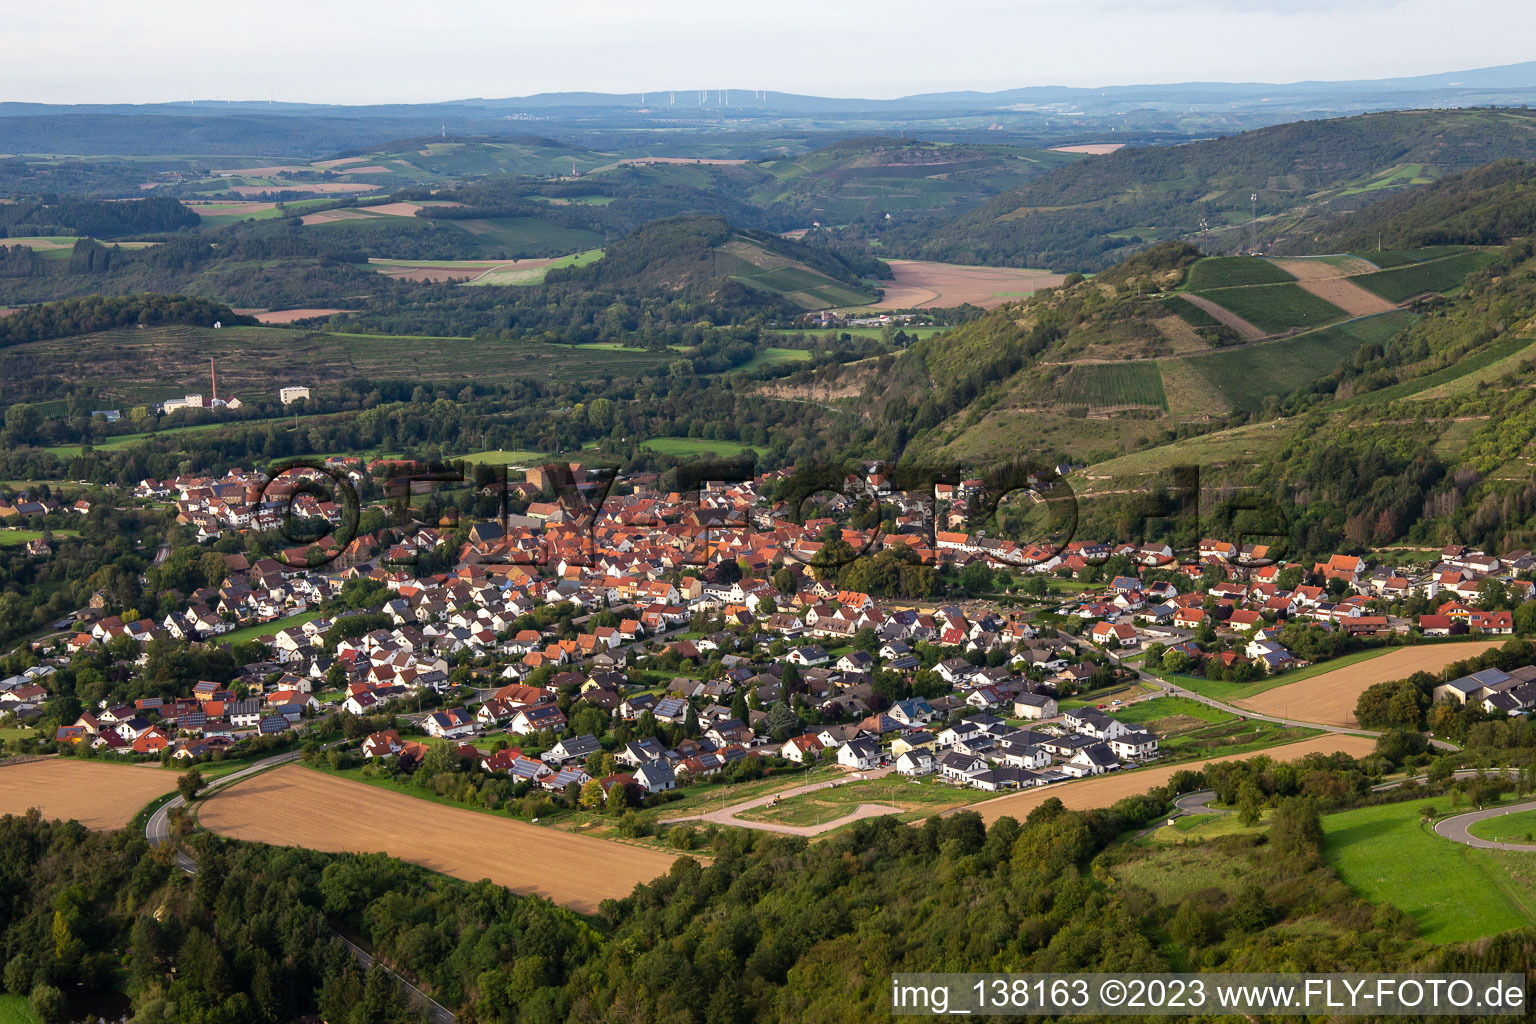 Drone recording of Odernheim am Glan in the state Rhineland-Palatinate, Germany